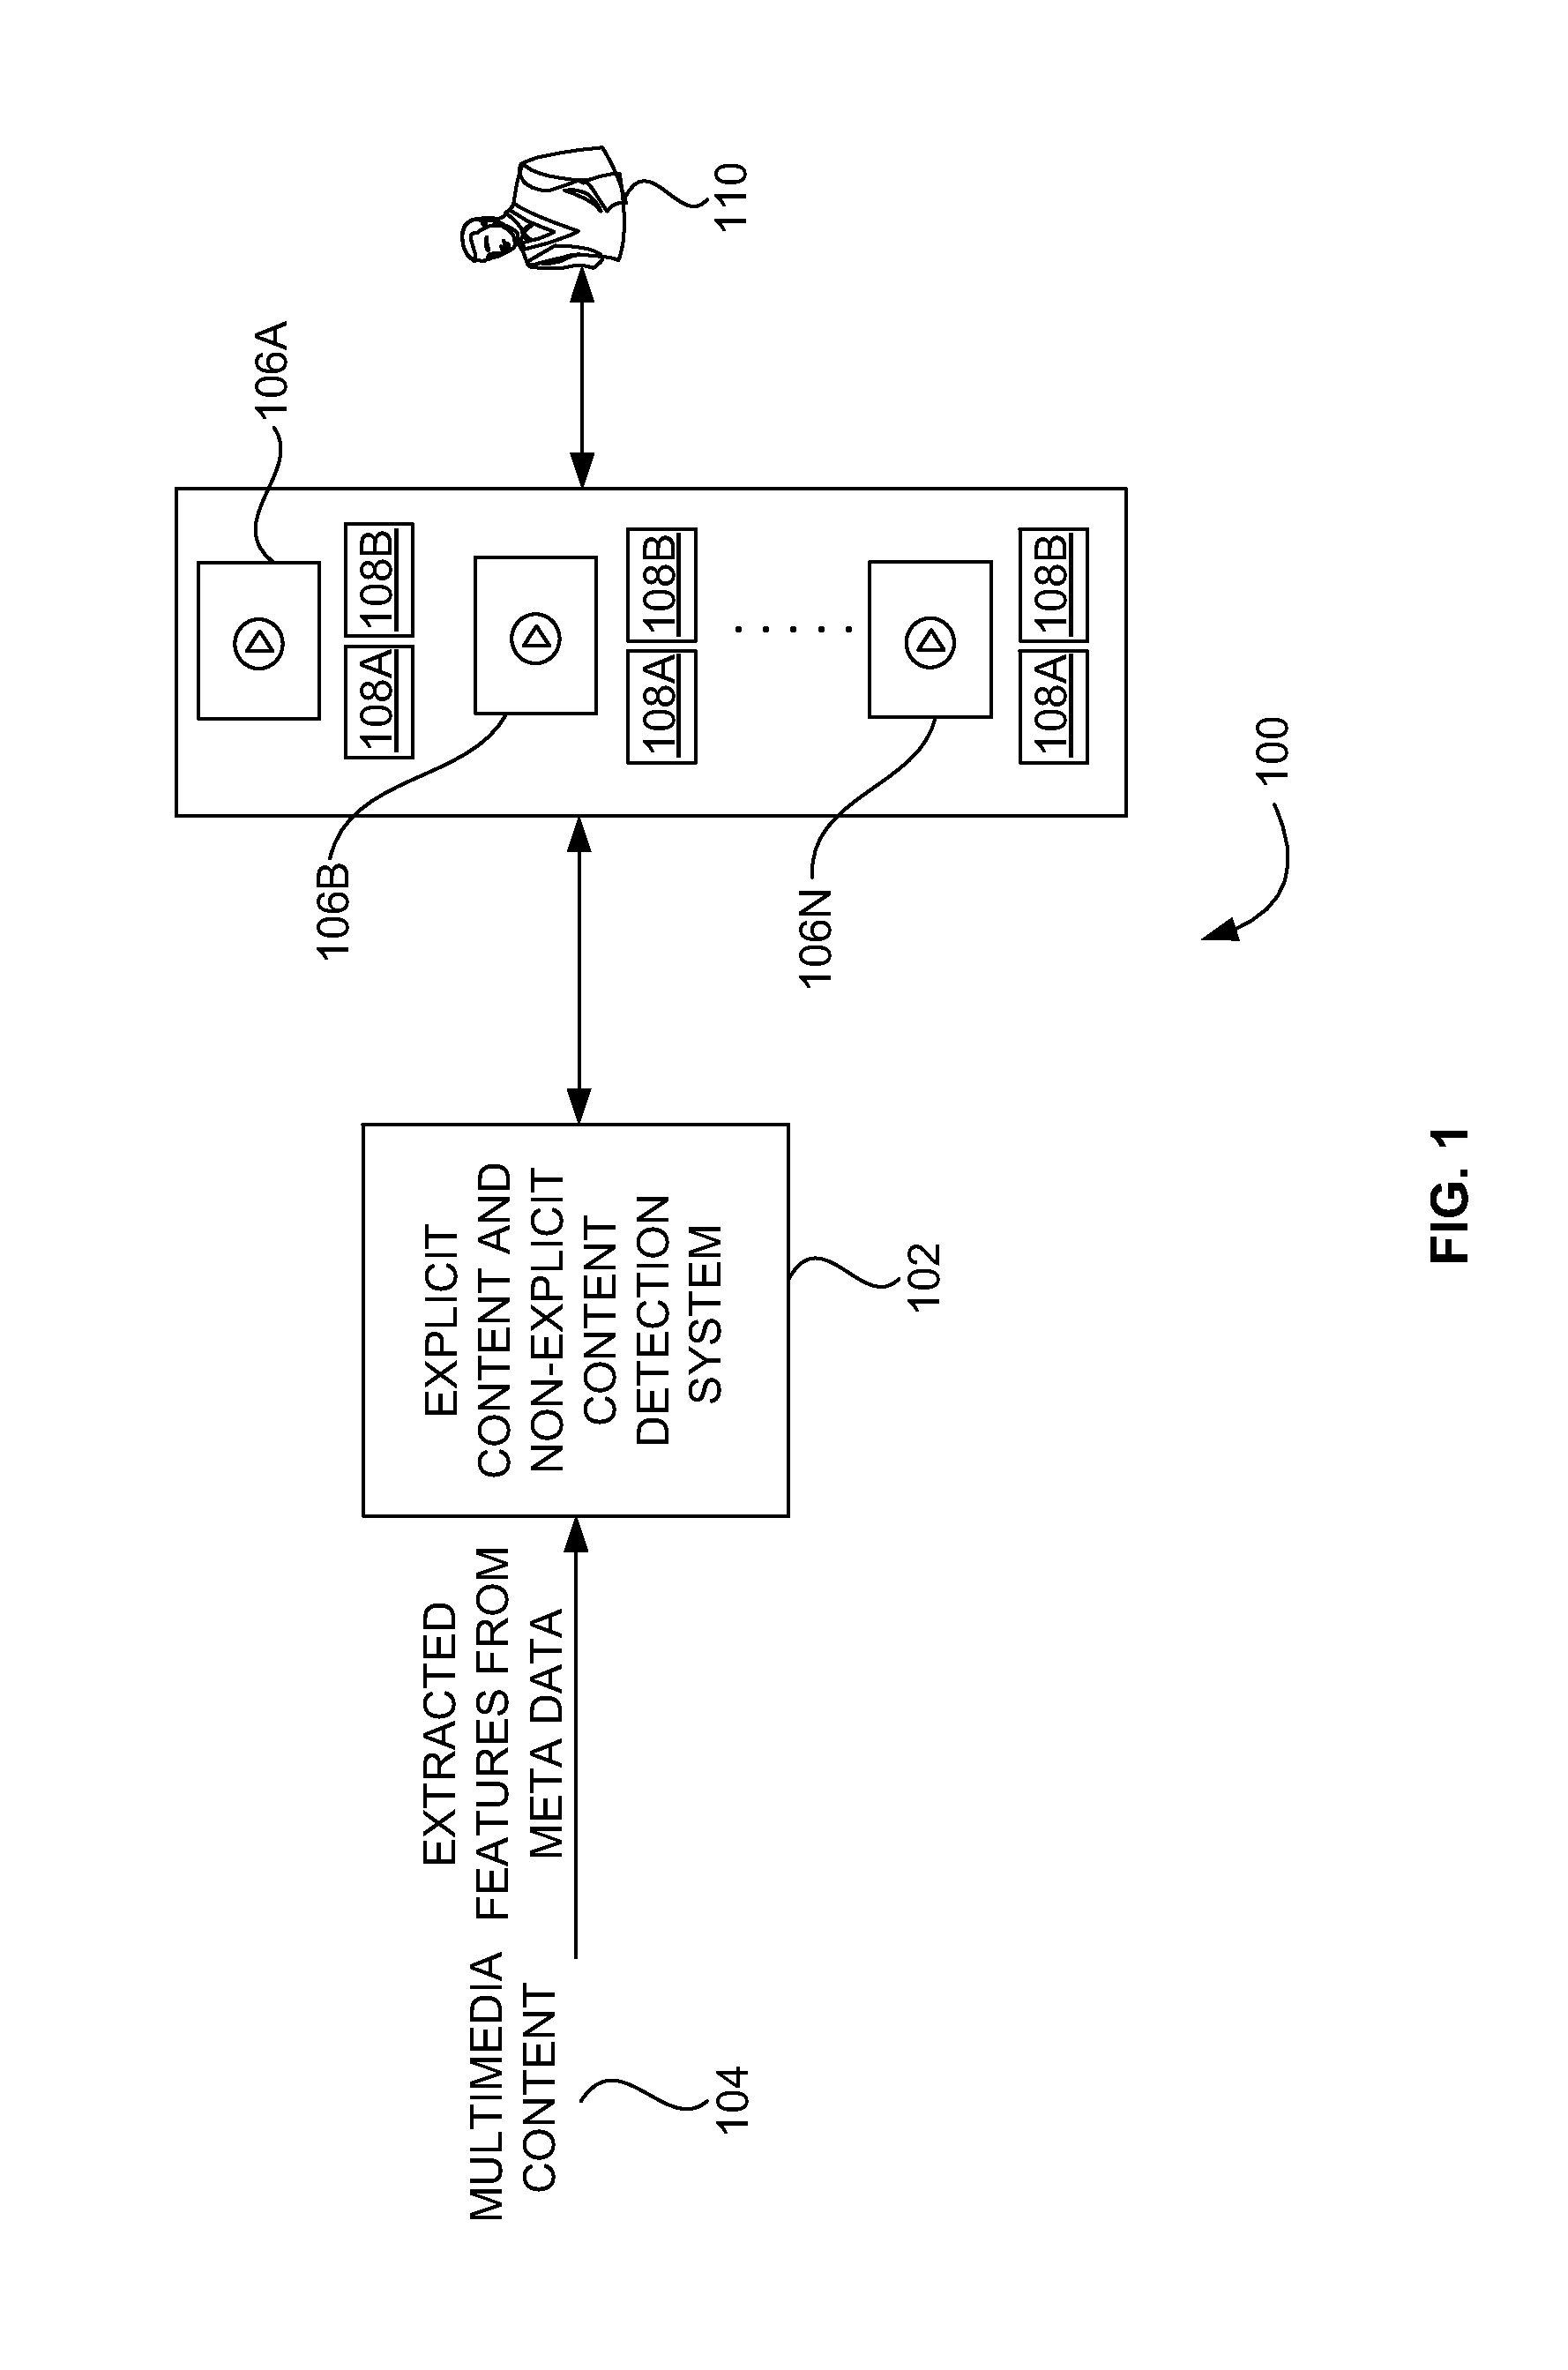 System and method for detecting explicit multimedia content